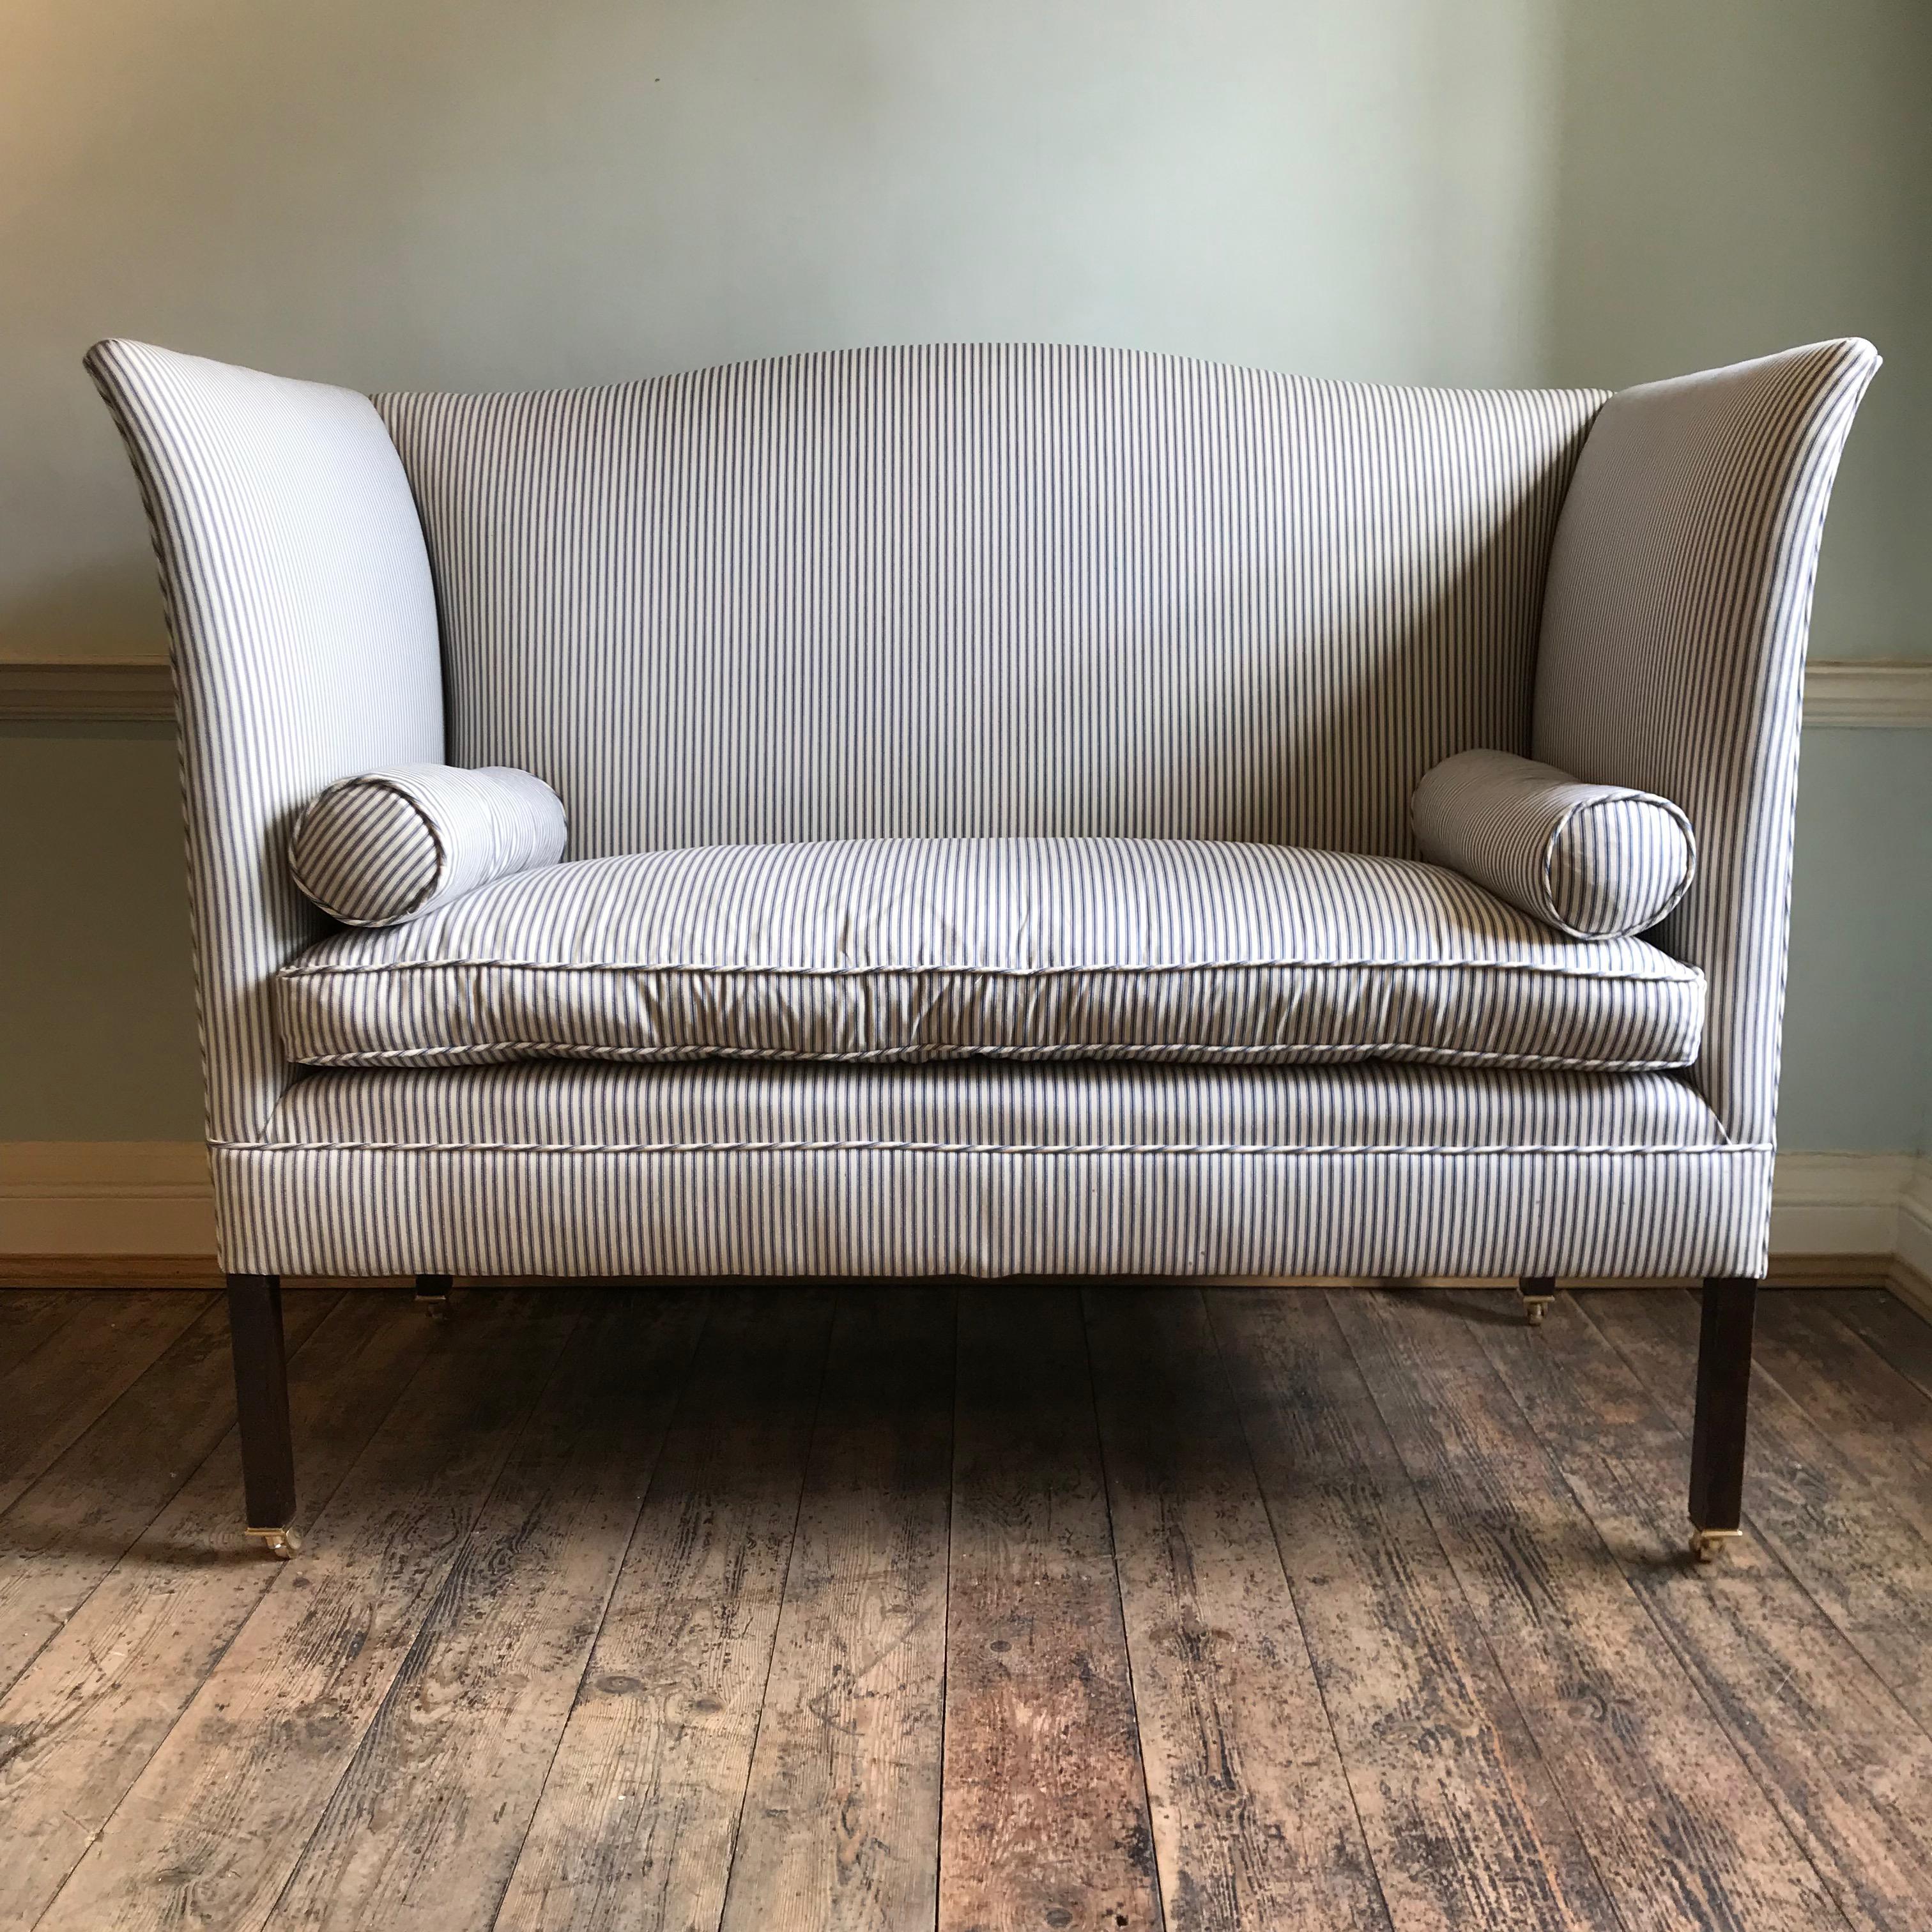 The Admiral sofa by Noble and Thane - adapted from an elegant English wingback design. 

Shown here in full rigging, with optional brass castors and bolster cushions, finished in a vintage style navy and white striped ticking.

Both the frame